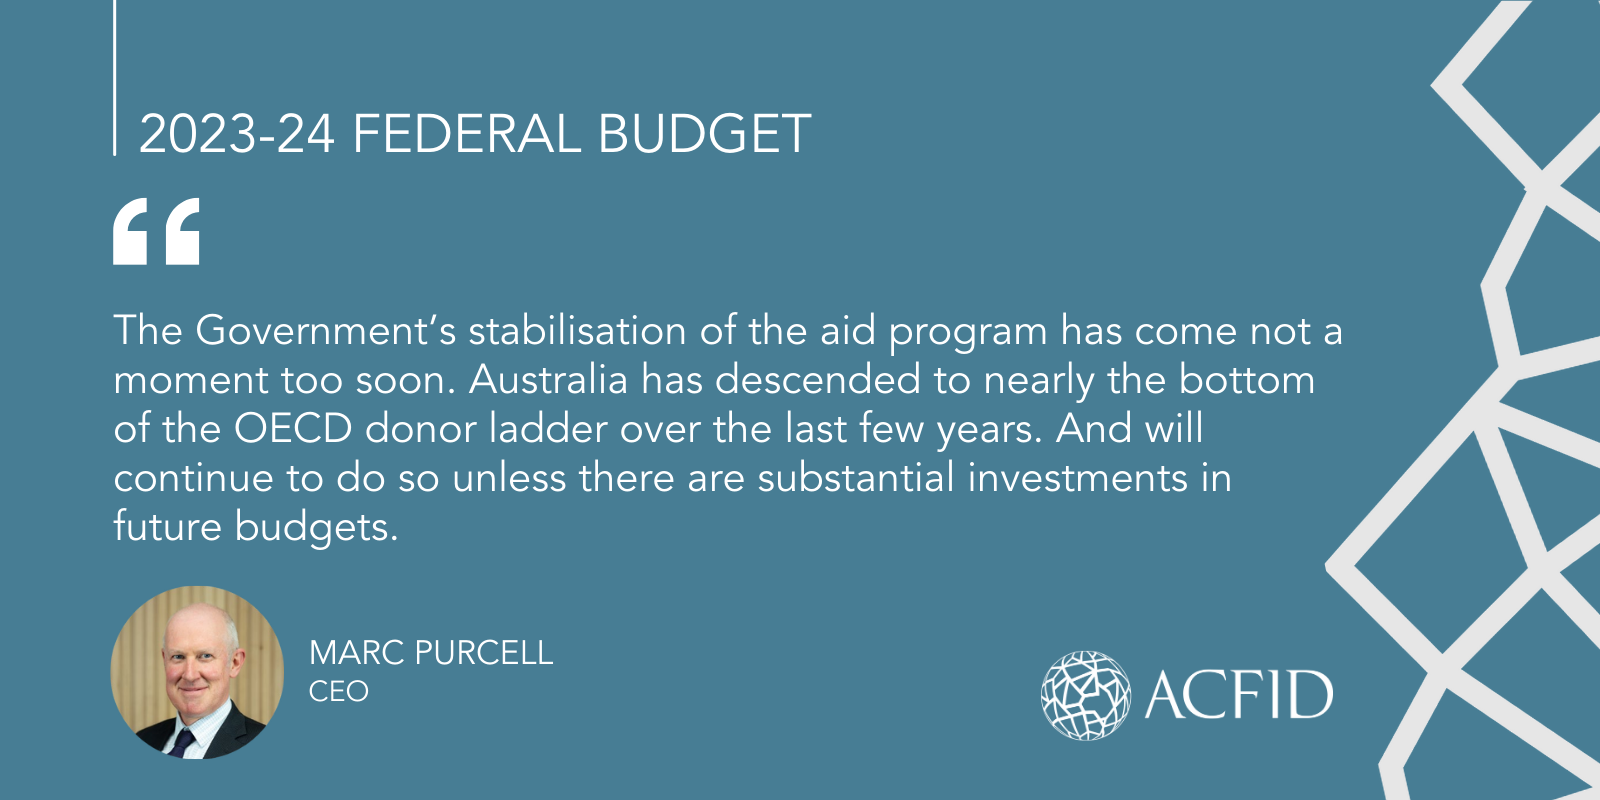 A quote from Marc Purcell on the 23/24 Federal Budget: The Government’s stabilisation of the aid program has come not a moment too soon. Australia has descended to nearly the bottom of the OECD donor ladder over the last few years. And will continue to do so unless there are substantial investments in future budgets'